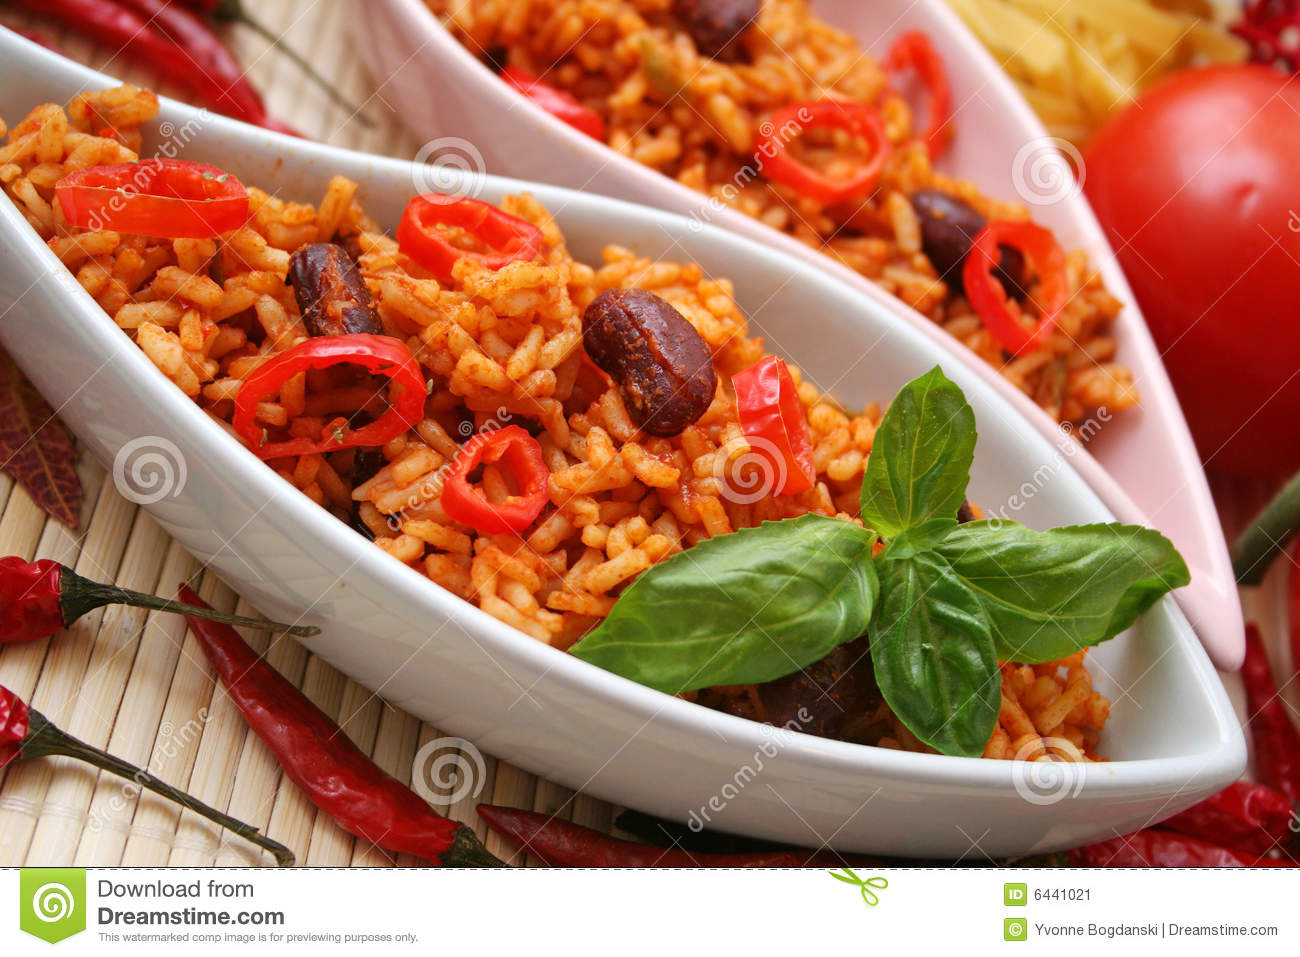 Mexican Rice Stock Image   Image  6441021